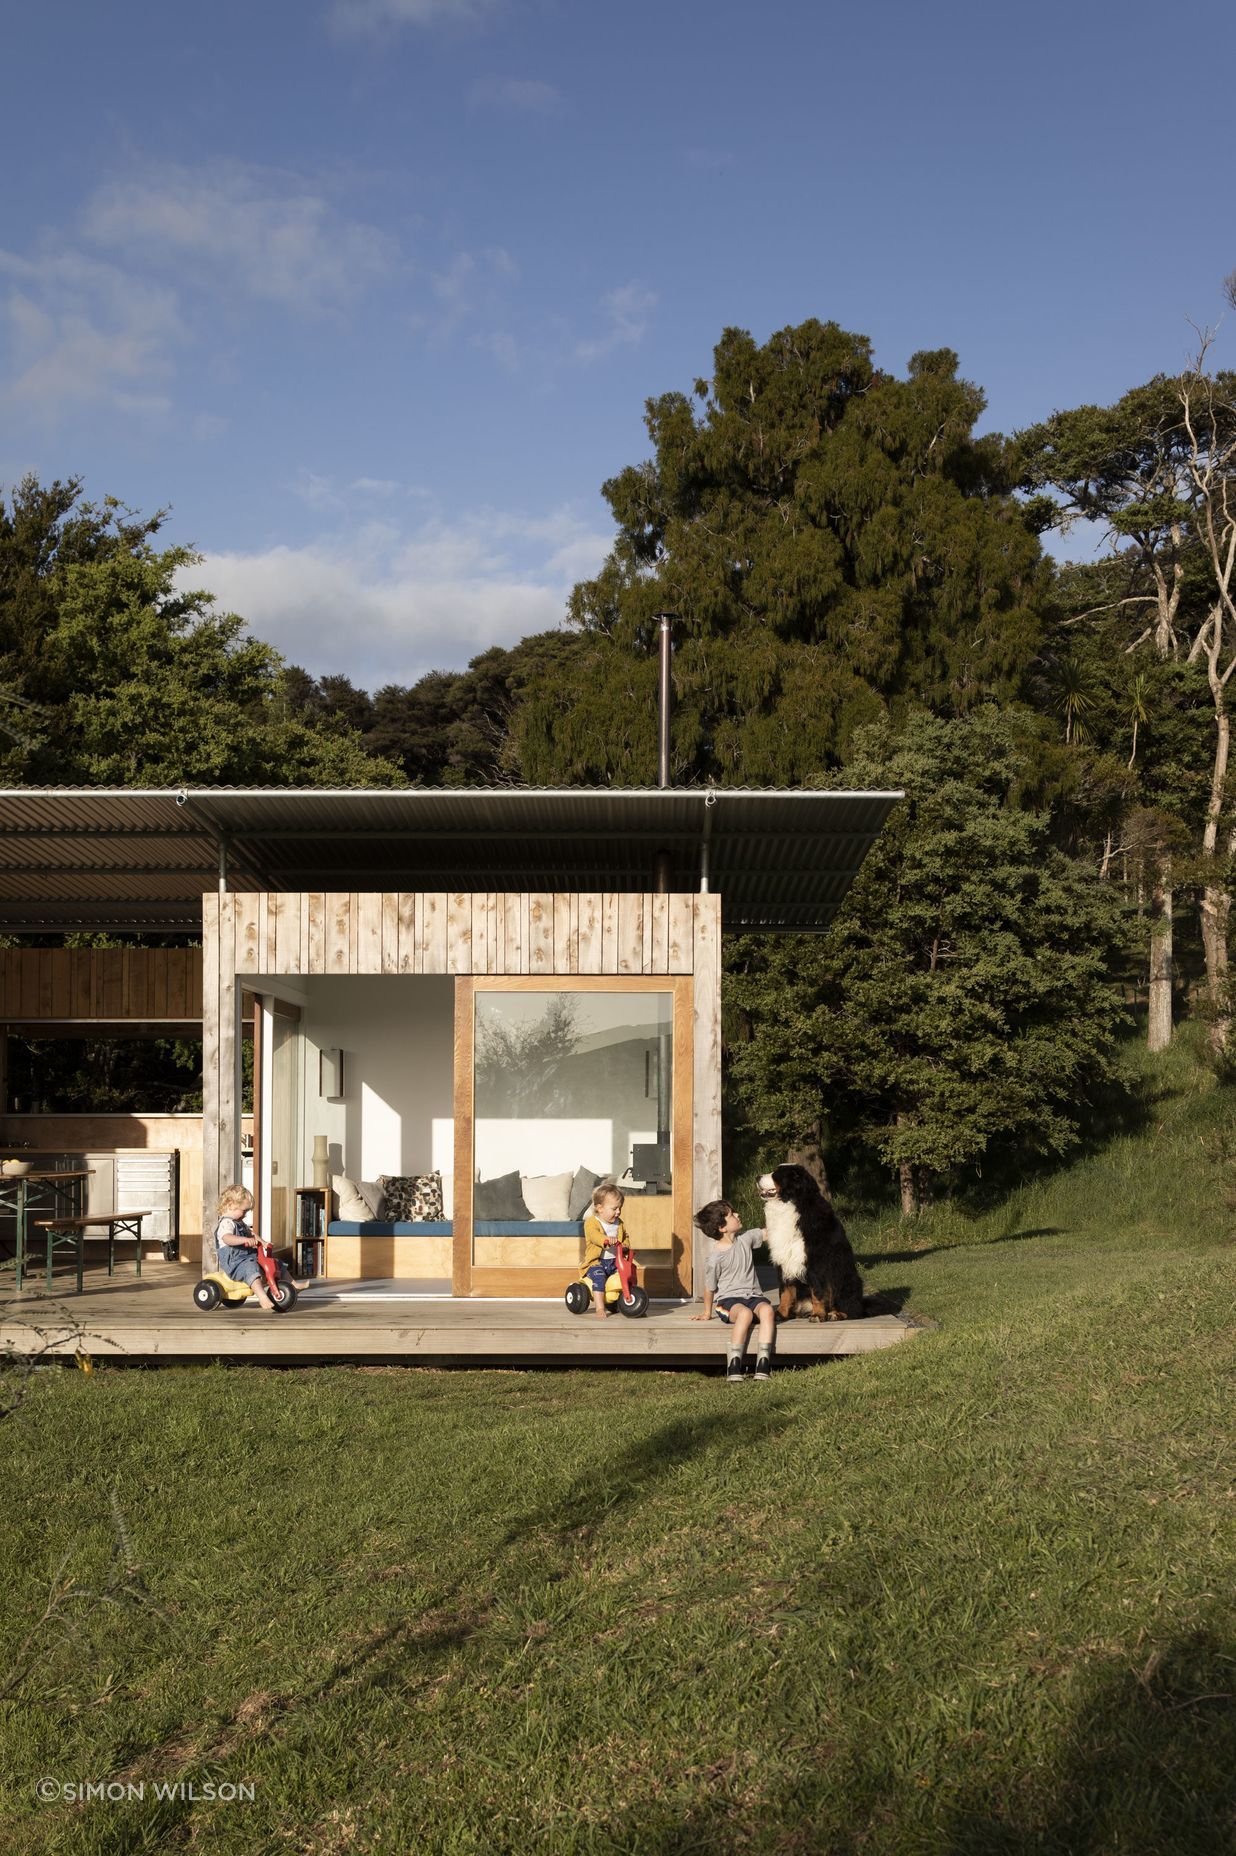 Designed by Patchwork Architecture for a rural property.